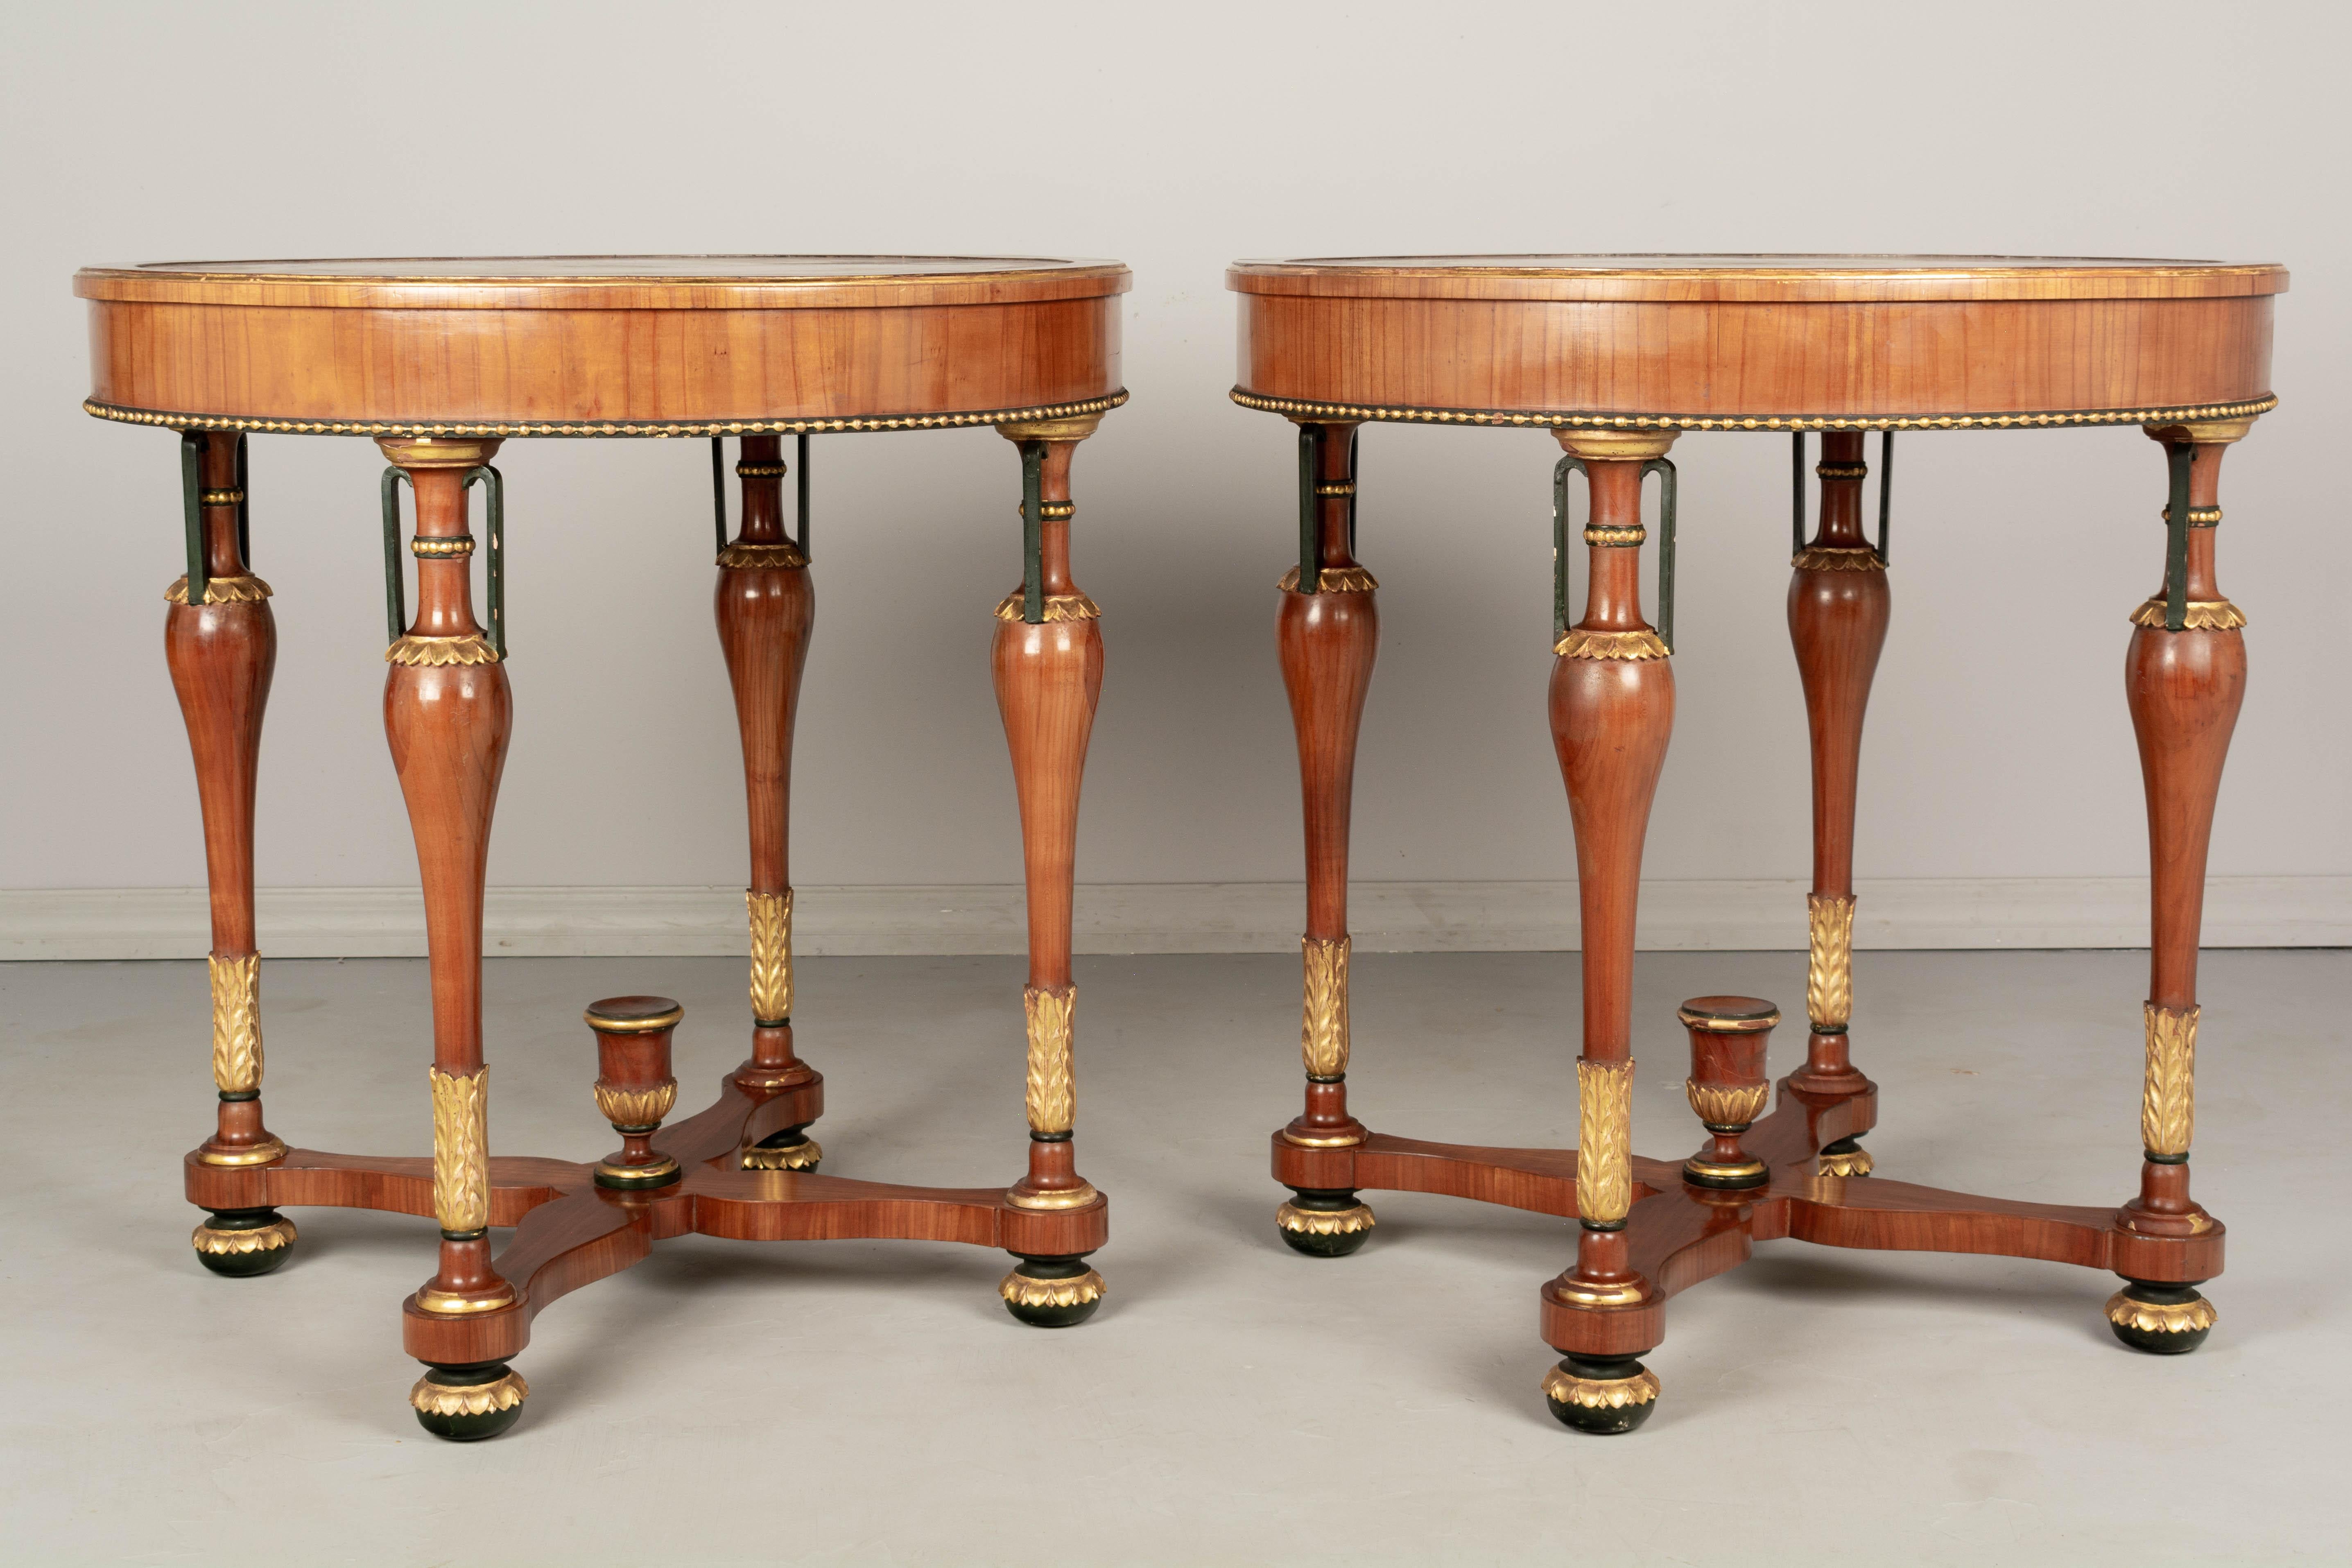 Pair of Italian Neoclassical Scagliola Top Center Tables In Good Condition For Sale In Winter Park, FL